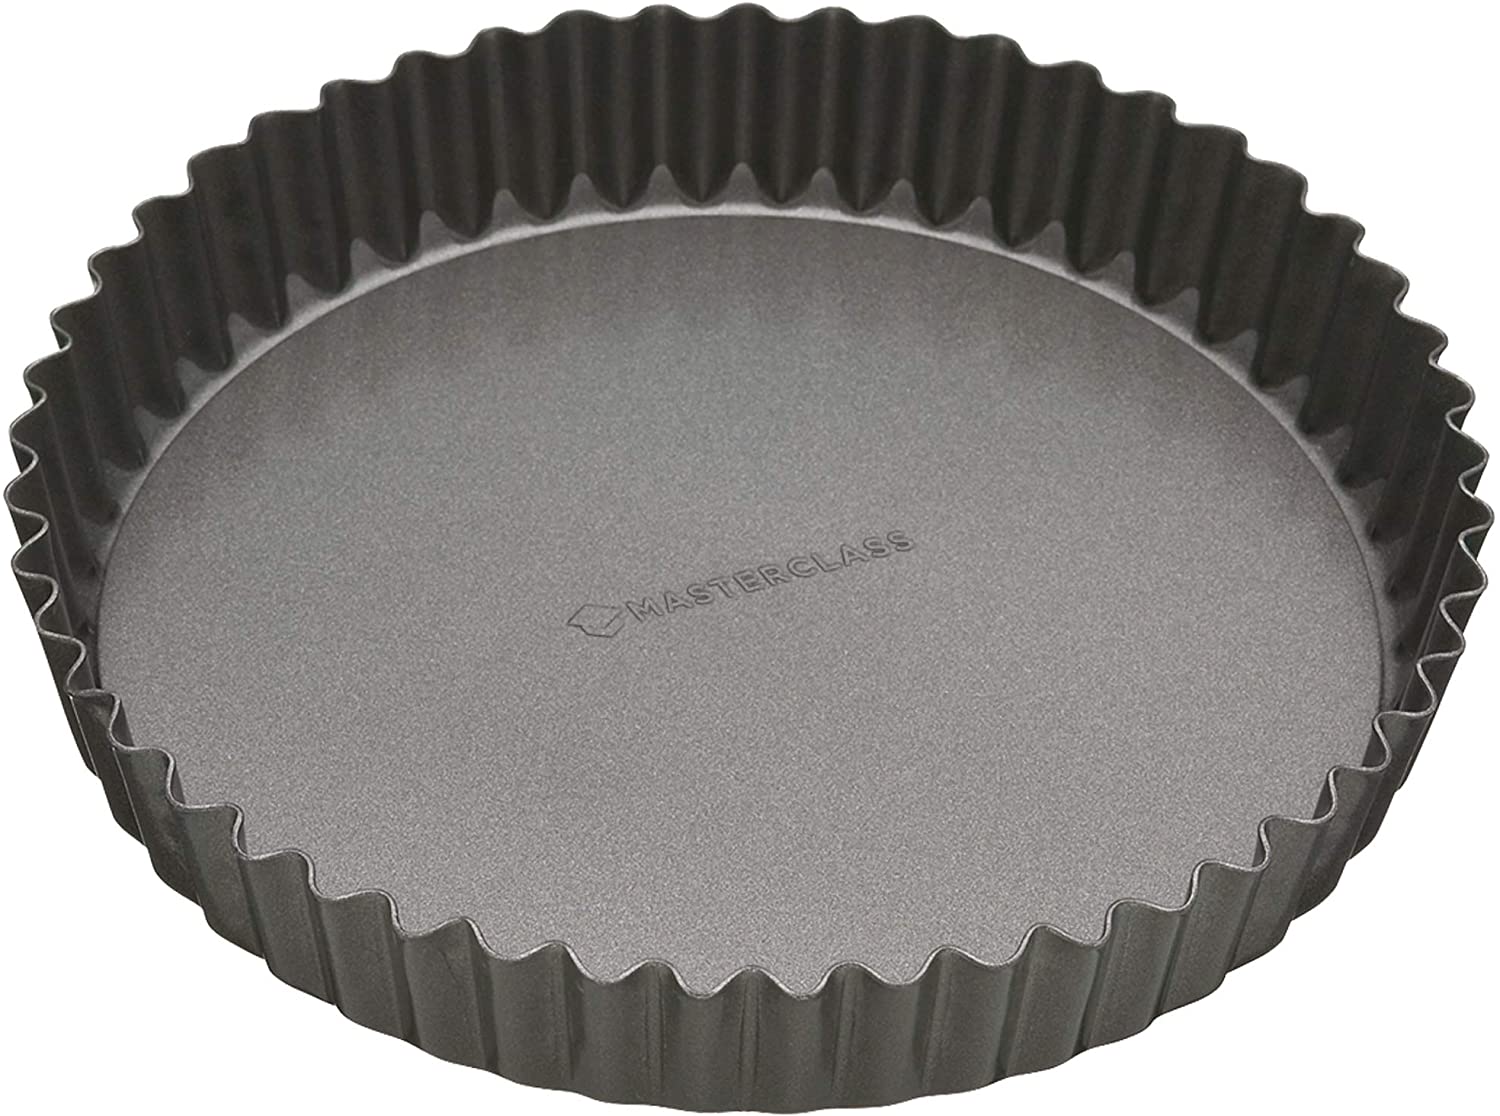 KitchenCraft Master Class Non-Stick 23cm Loose Base Fluted Quiche Tin